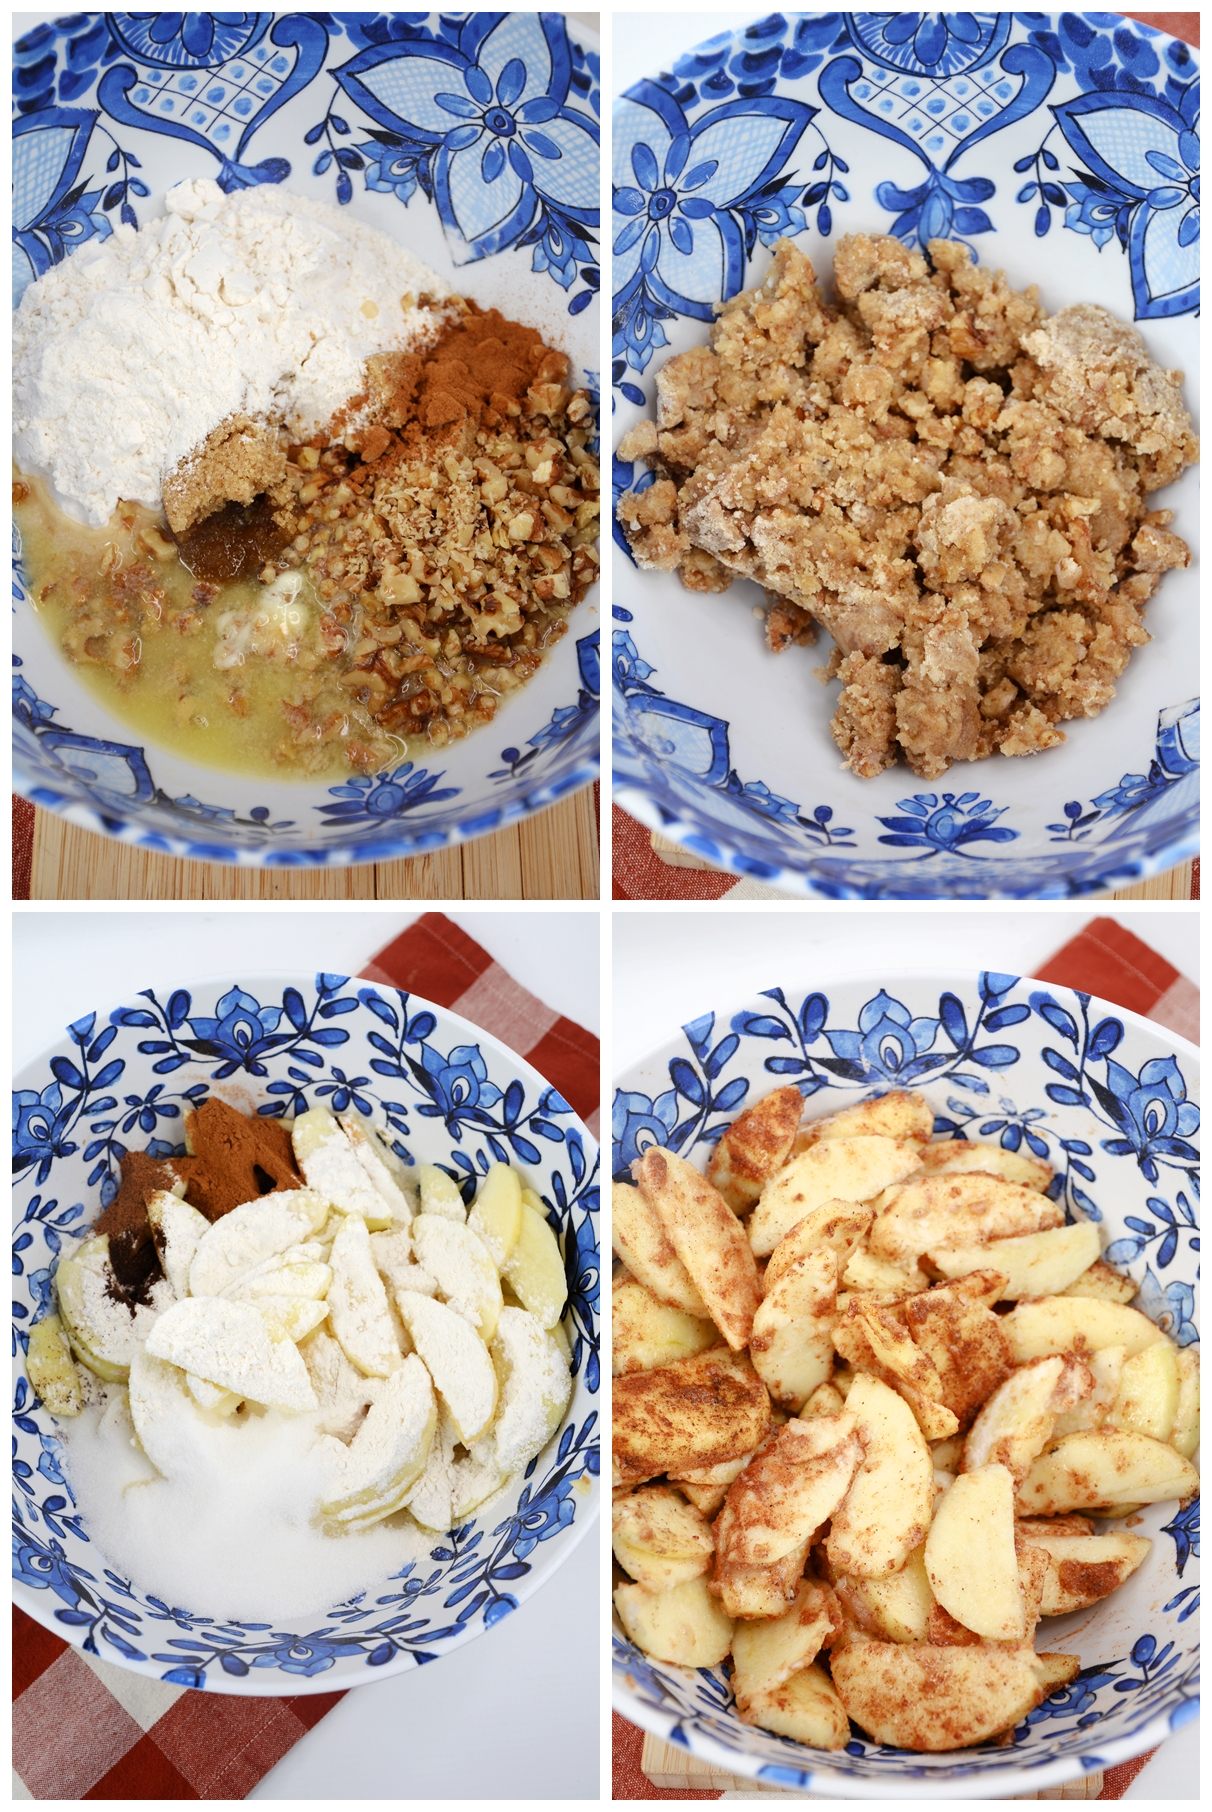 Apple crumble pie procedure in photos. Mixing all ingredients of sliced apples, lemon juice, flour, cloves, nutmeg, cinnamon, sugar, and vanilla together in a bowl before baking them.